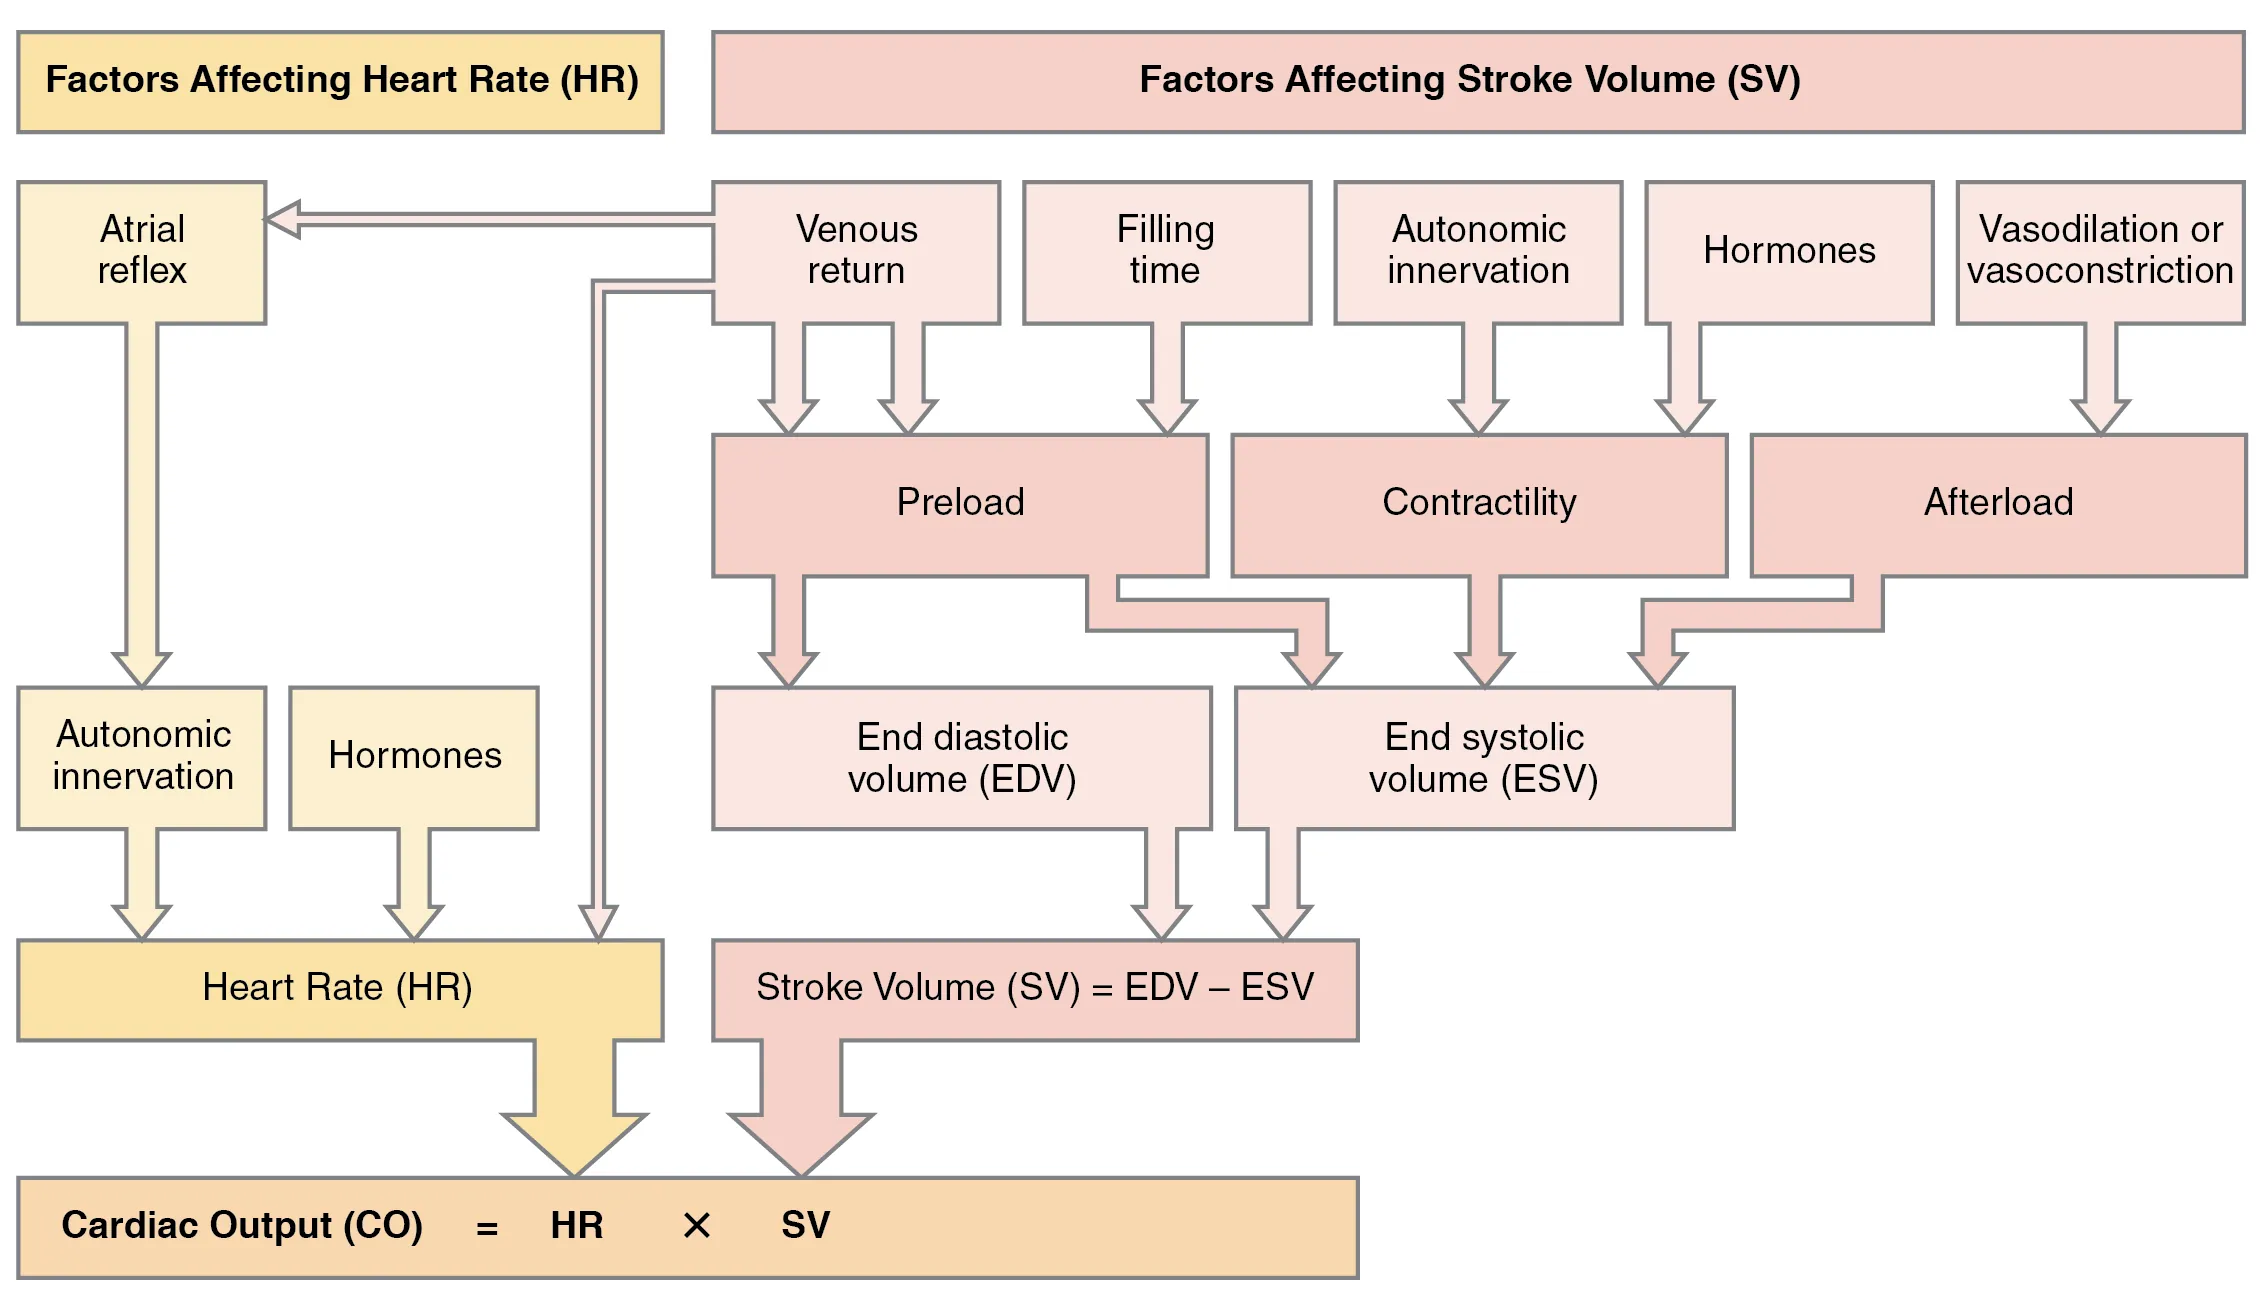 This flowchart lists all the important factors that affect cardiac output.